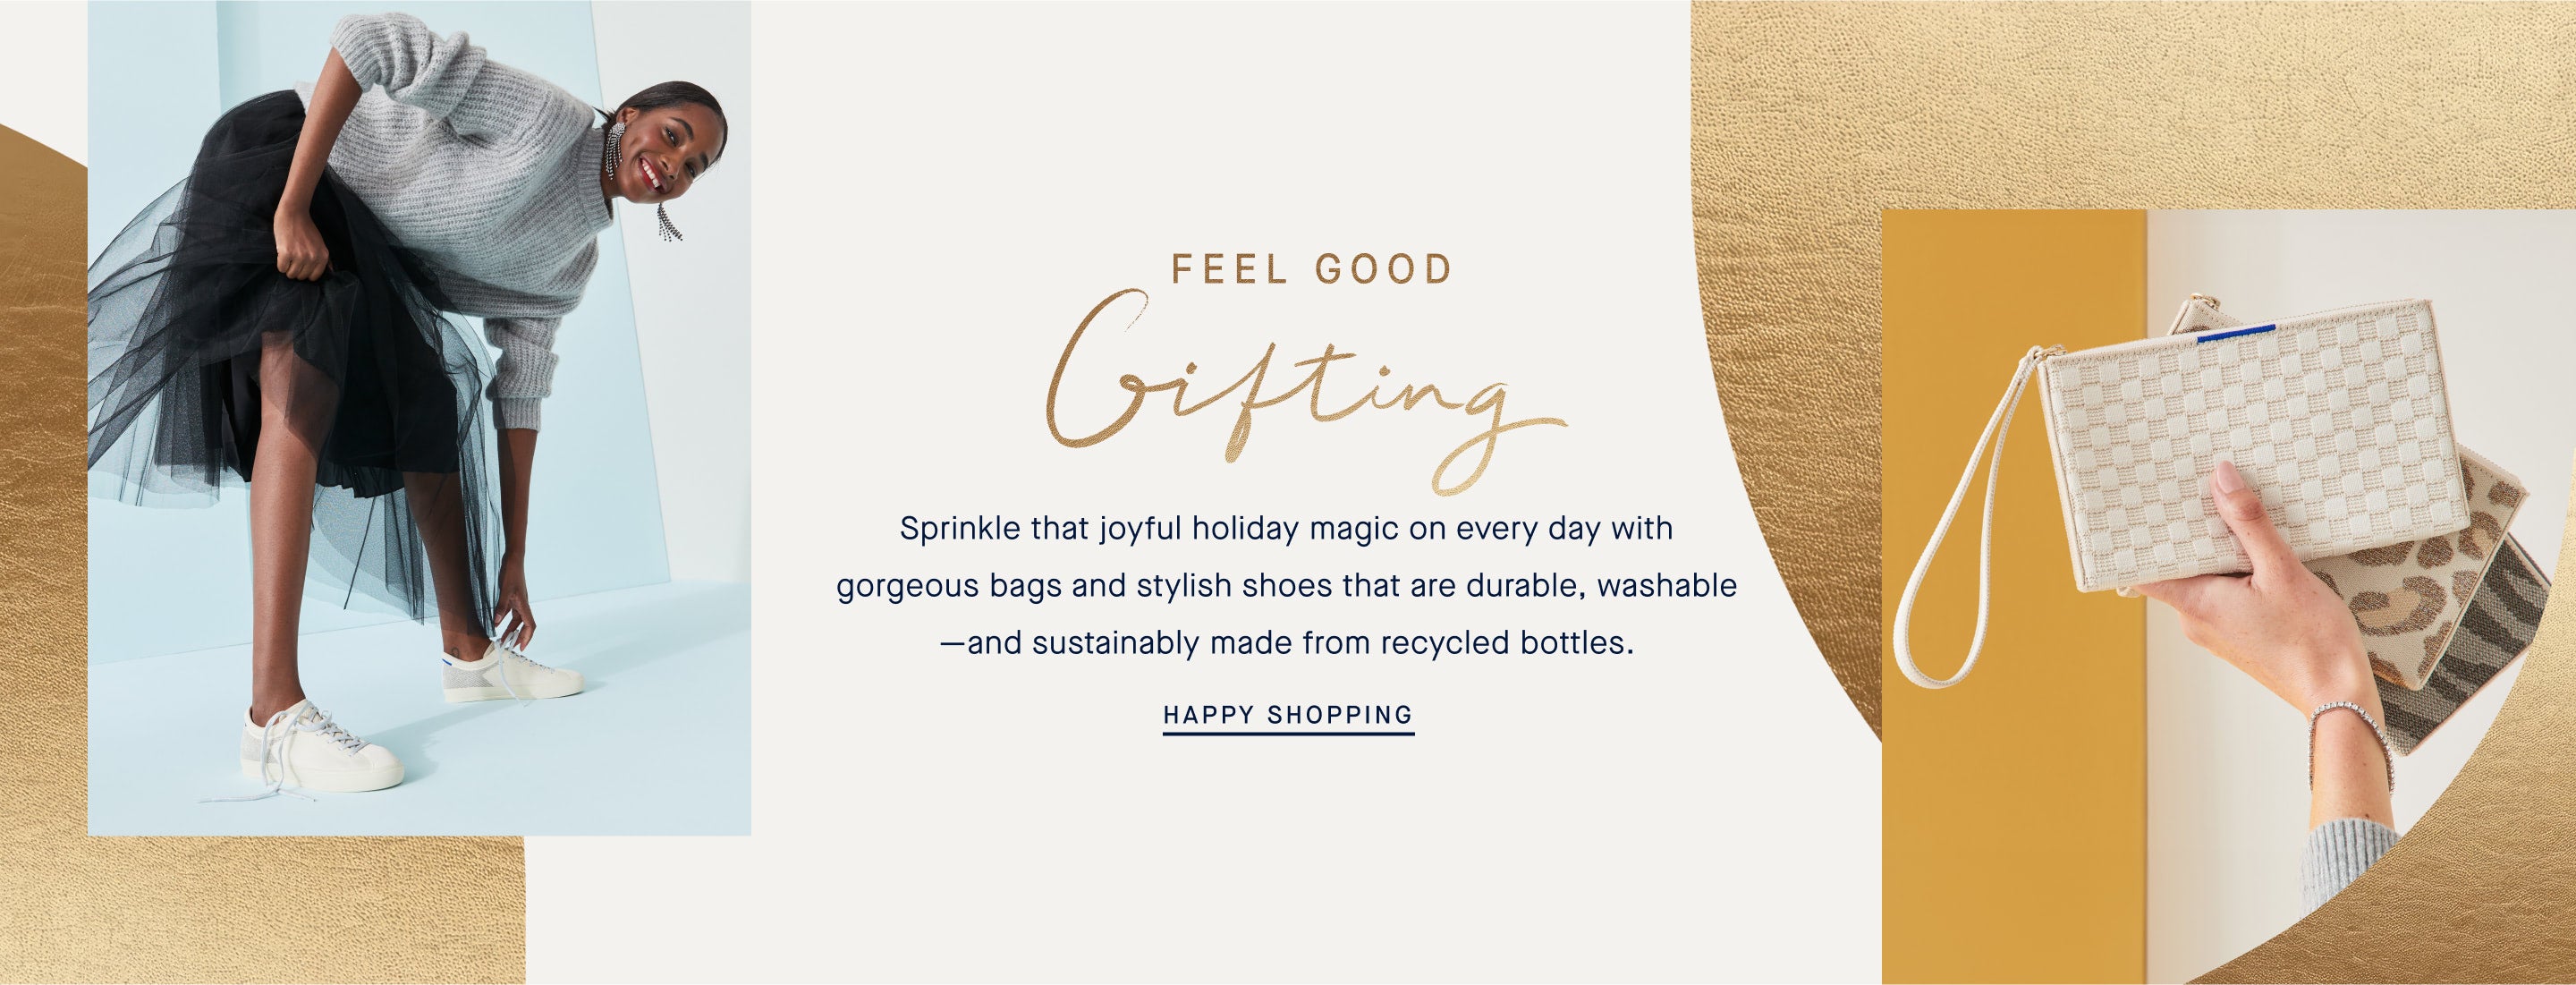 Feel good gifting. Sprinkle that joyful holiday magic on everyday with gorgeous bags and stylish shoes that are durable, washable -and sustainably made by recycled bottles. Happy Shopping